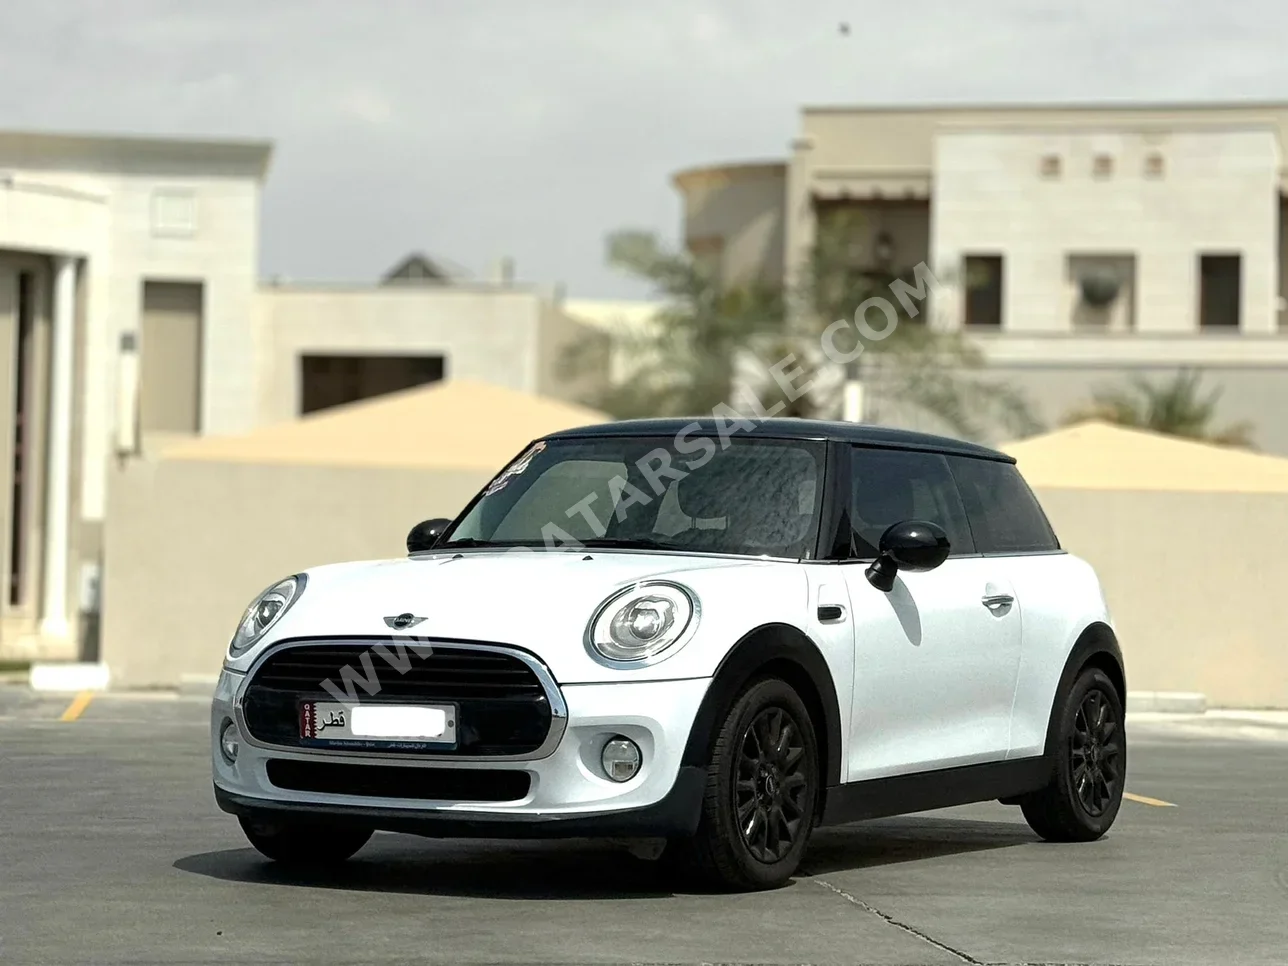 Mini  Cooper  2018  Automatic  38,000 Km  3 Cylinder  Front Wheel Drive (FWD)  Hatchback  White